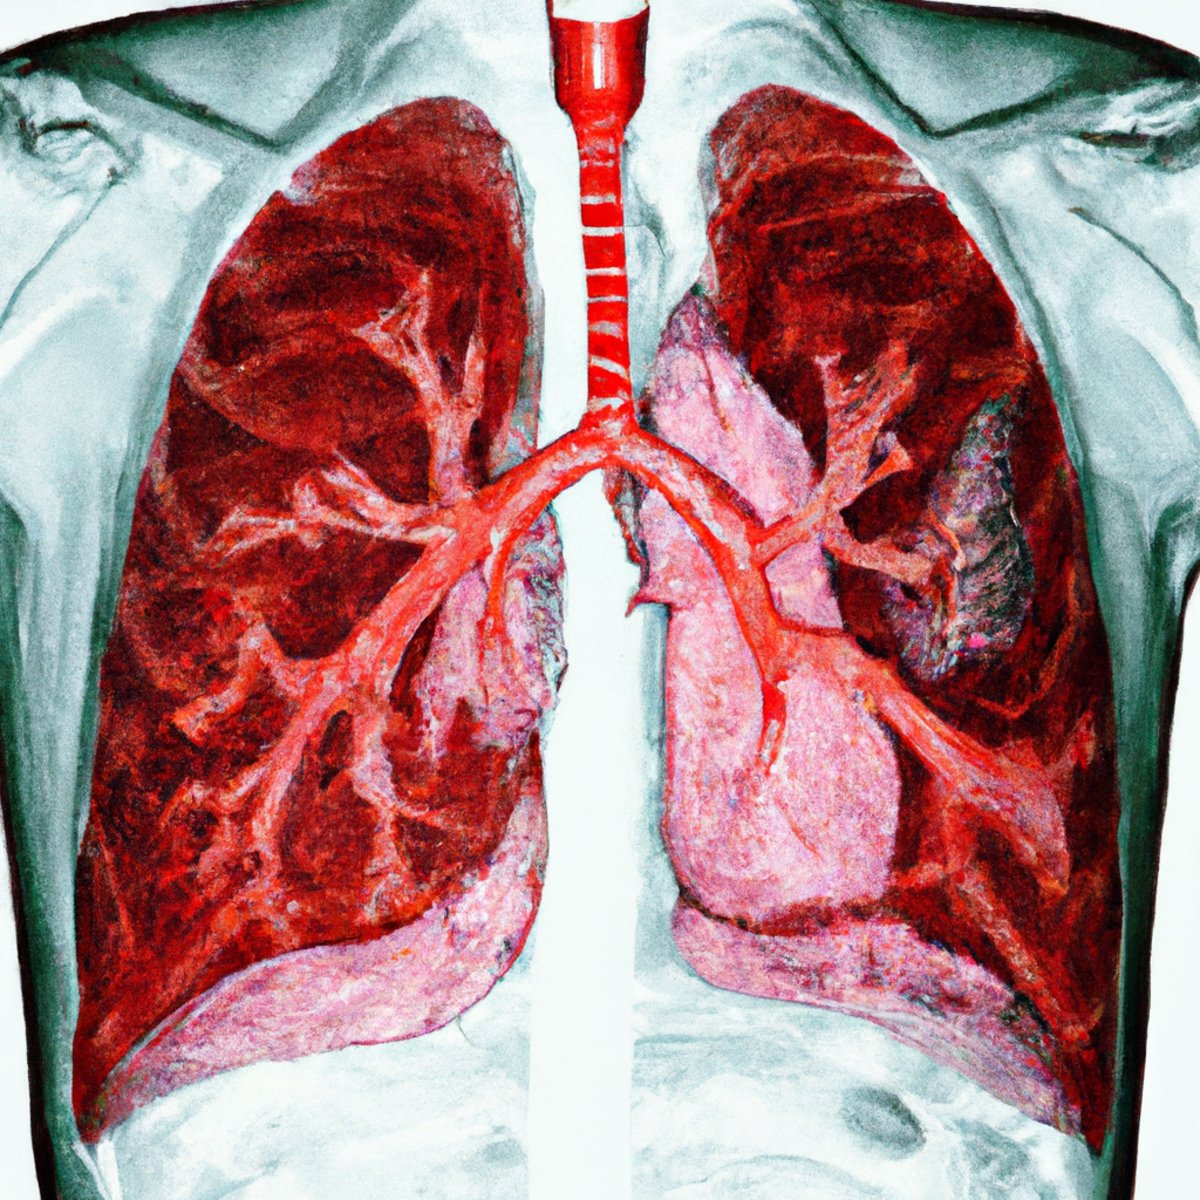 Close-up of healthy lung with translucent nodules, illustrating lymphangioleiomyomatosis and its genetic basis.